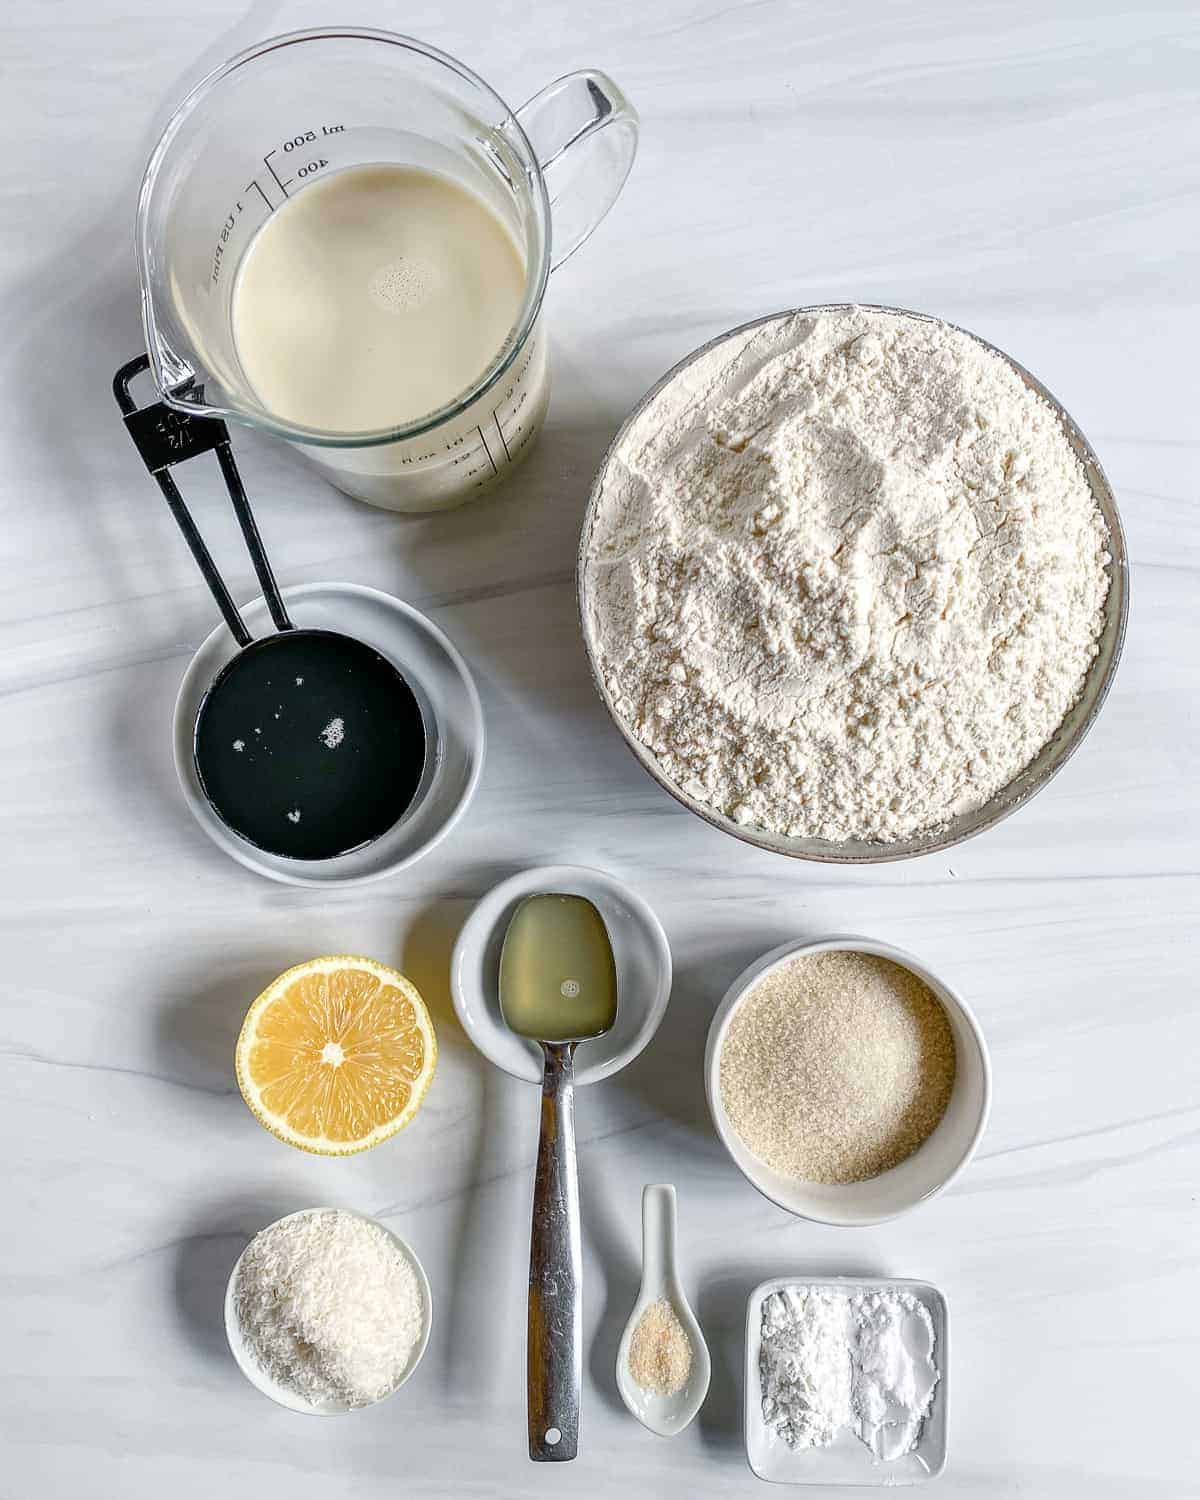 Vanilla Scones Ingredients measured out against a white surface